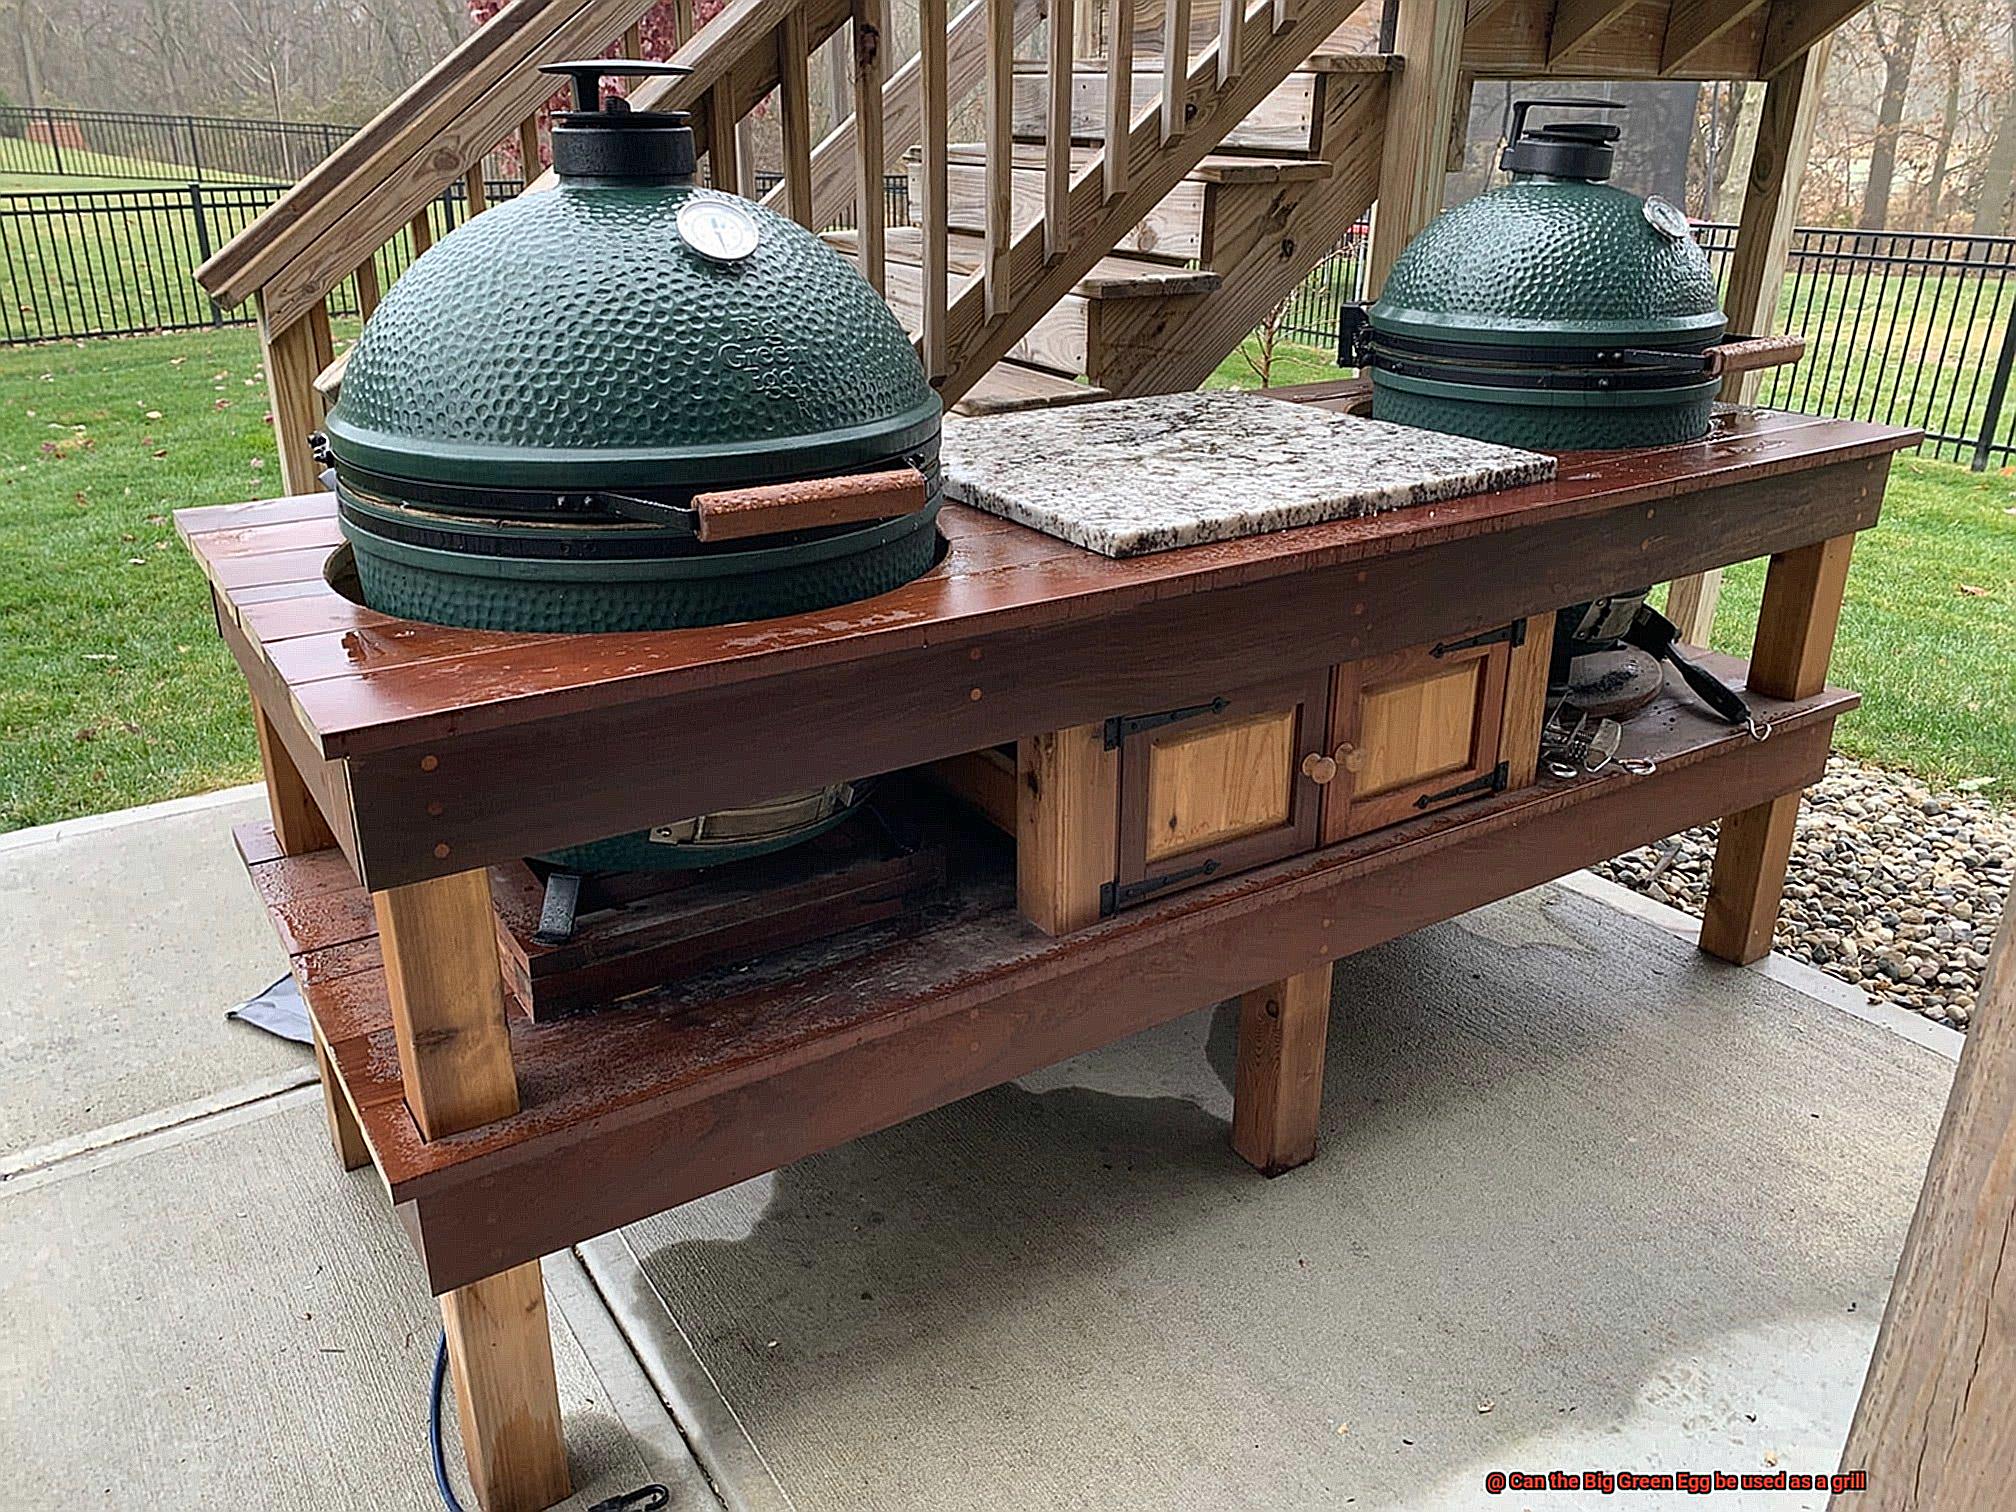 Can the Big Green Egg be used as a grill-2